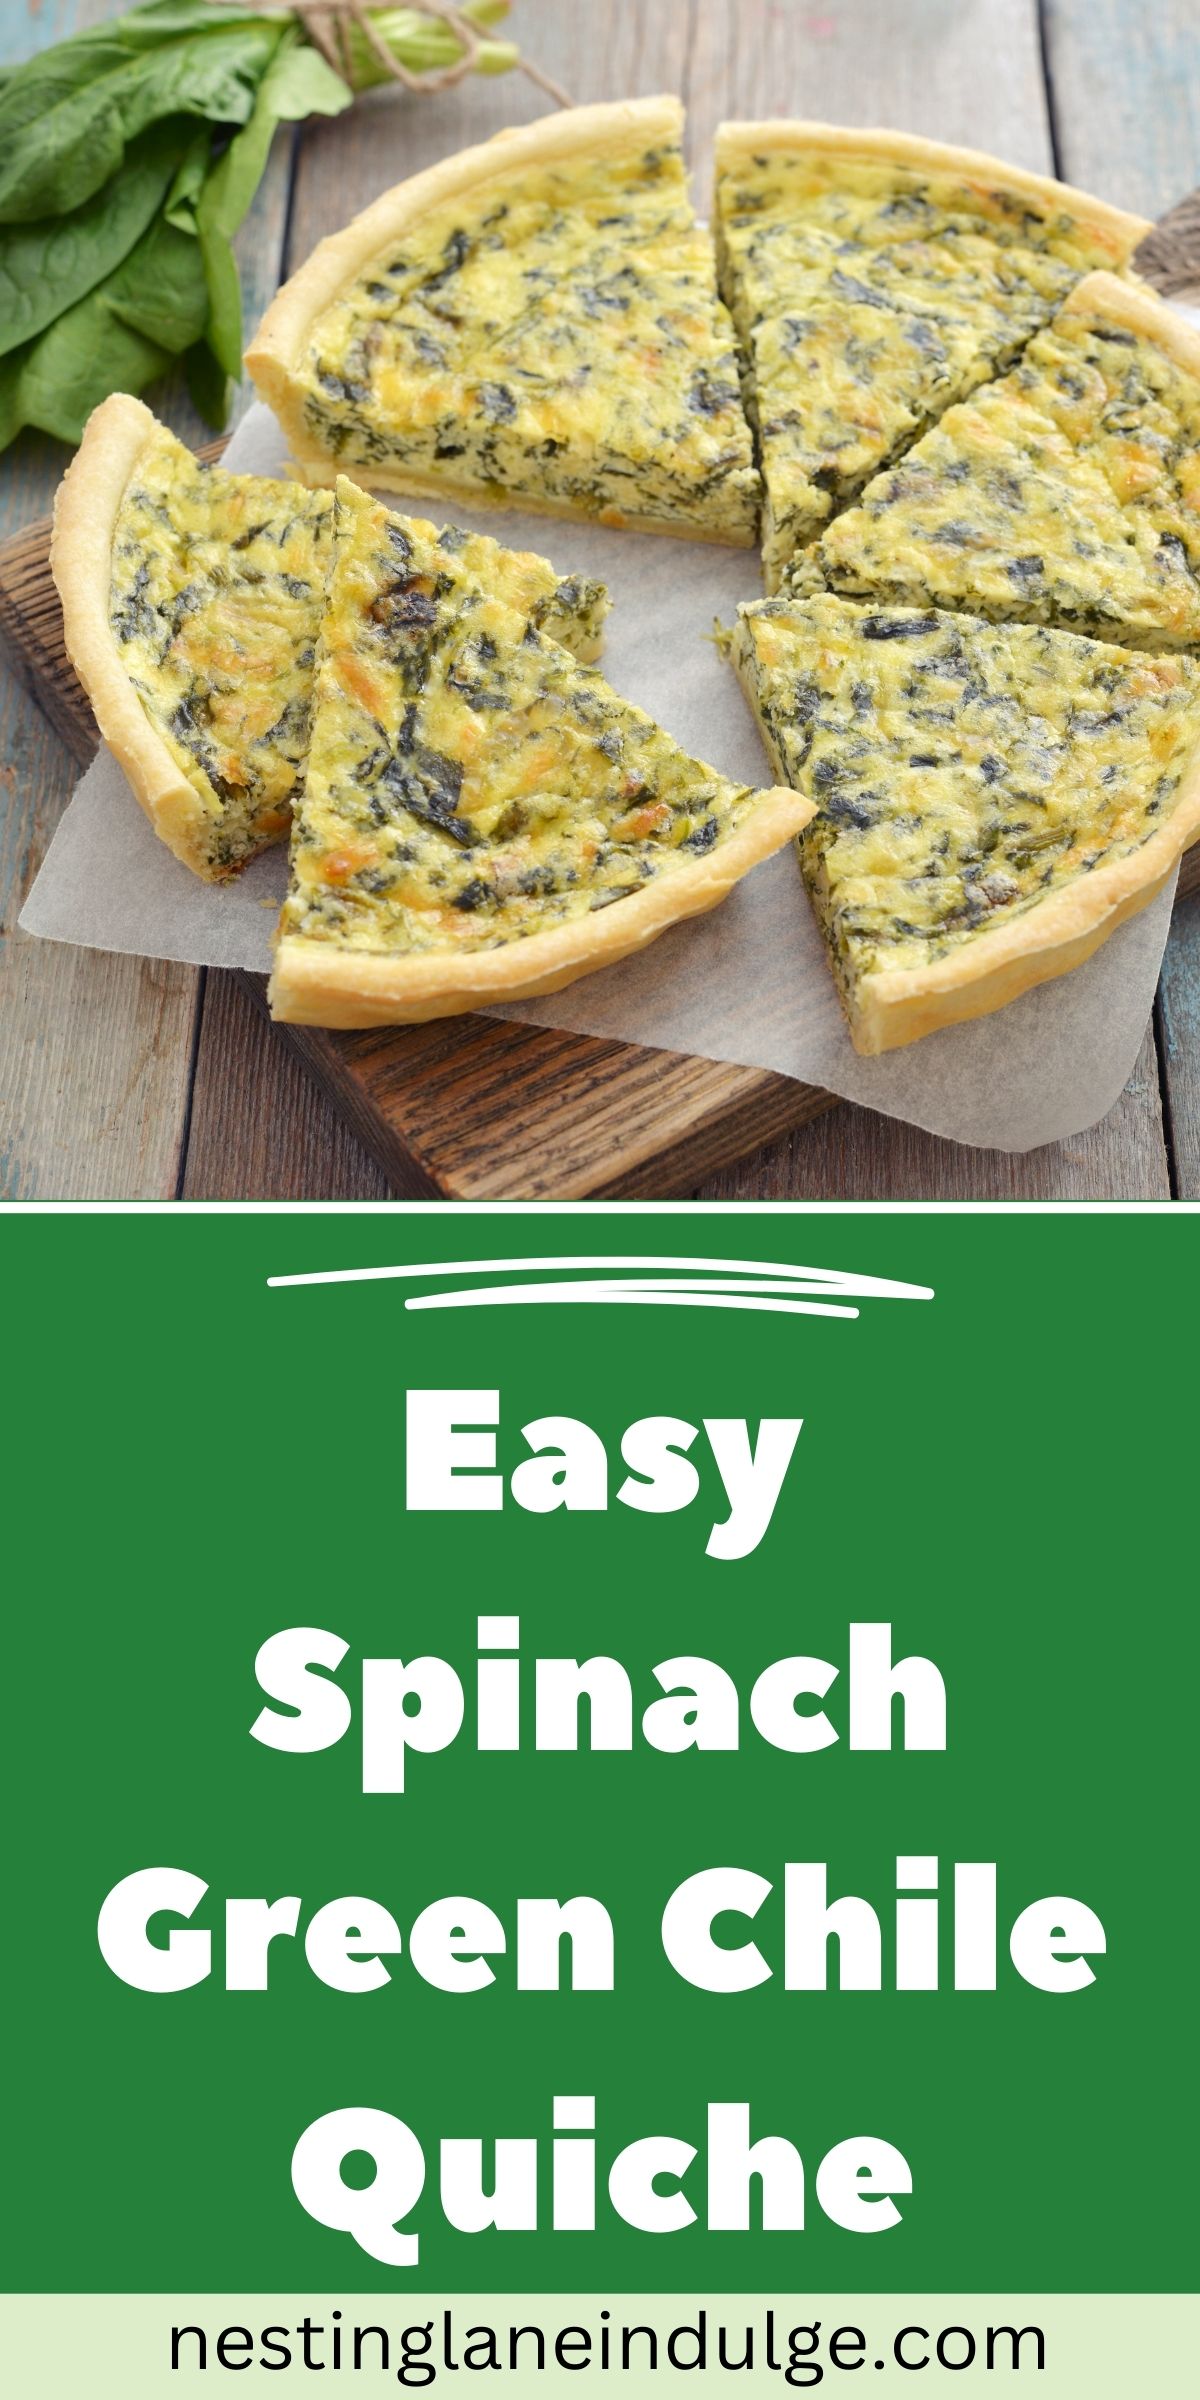 Graphic for Pinterest of Easy Spinach Green Chile Quiche Recipe.